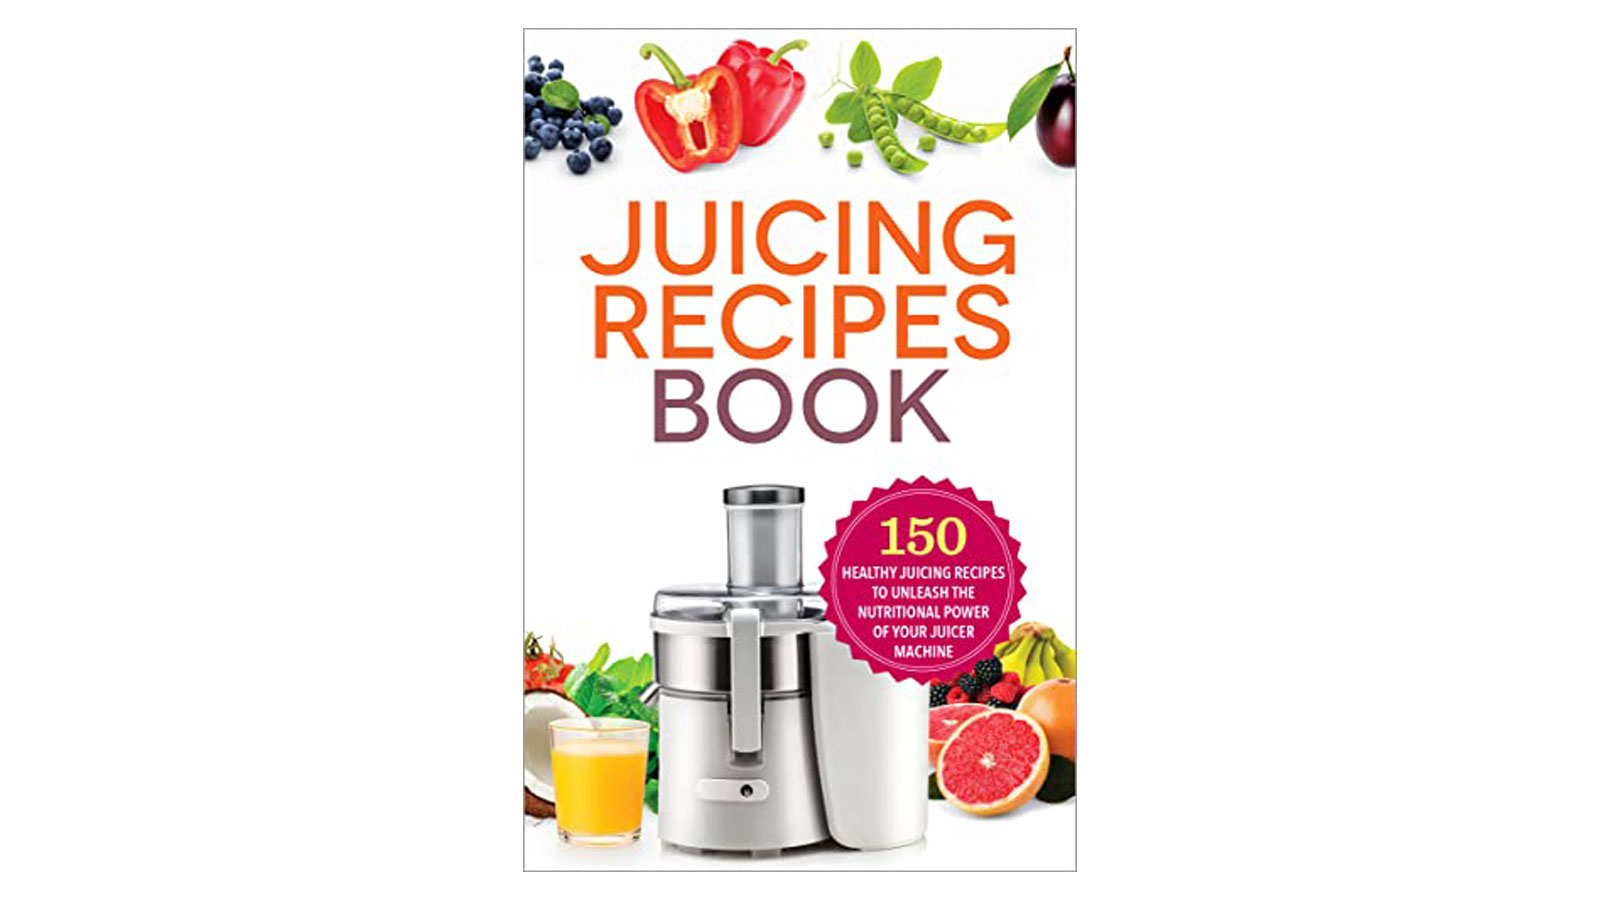 See all 11 images Follow the Author Mendocino Press Follow The Juicing Recipes Book: 150 Healthy Juicer Recipes to Unleash the Nutritional Power of Your Juicing Machine